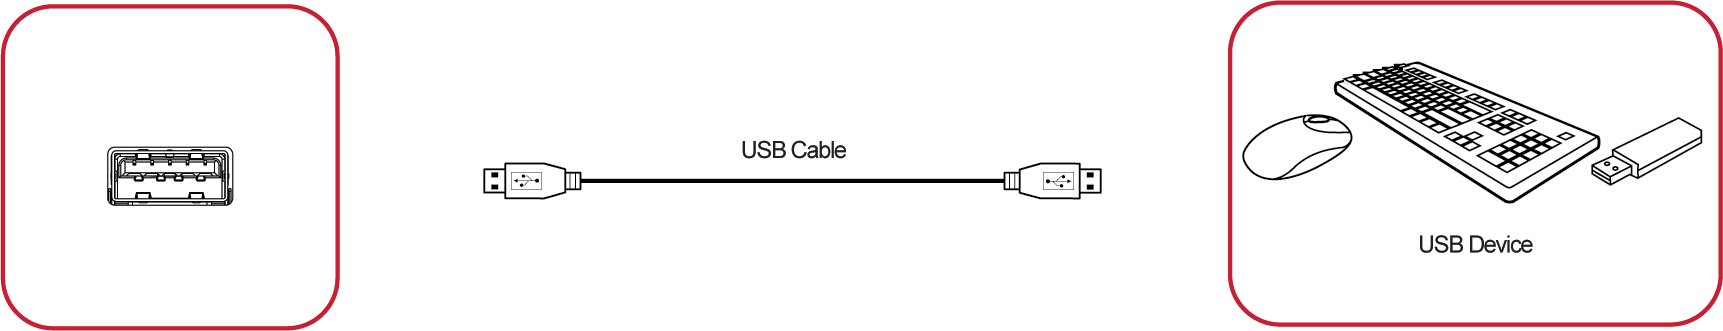 File:IFP50-3 USB Connection.png